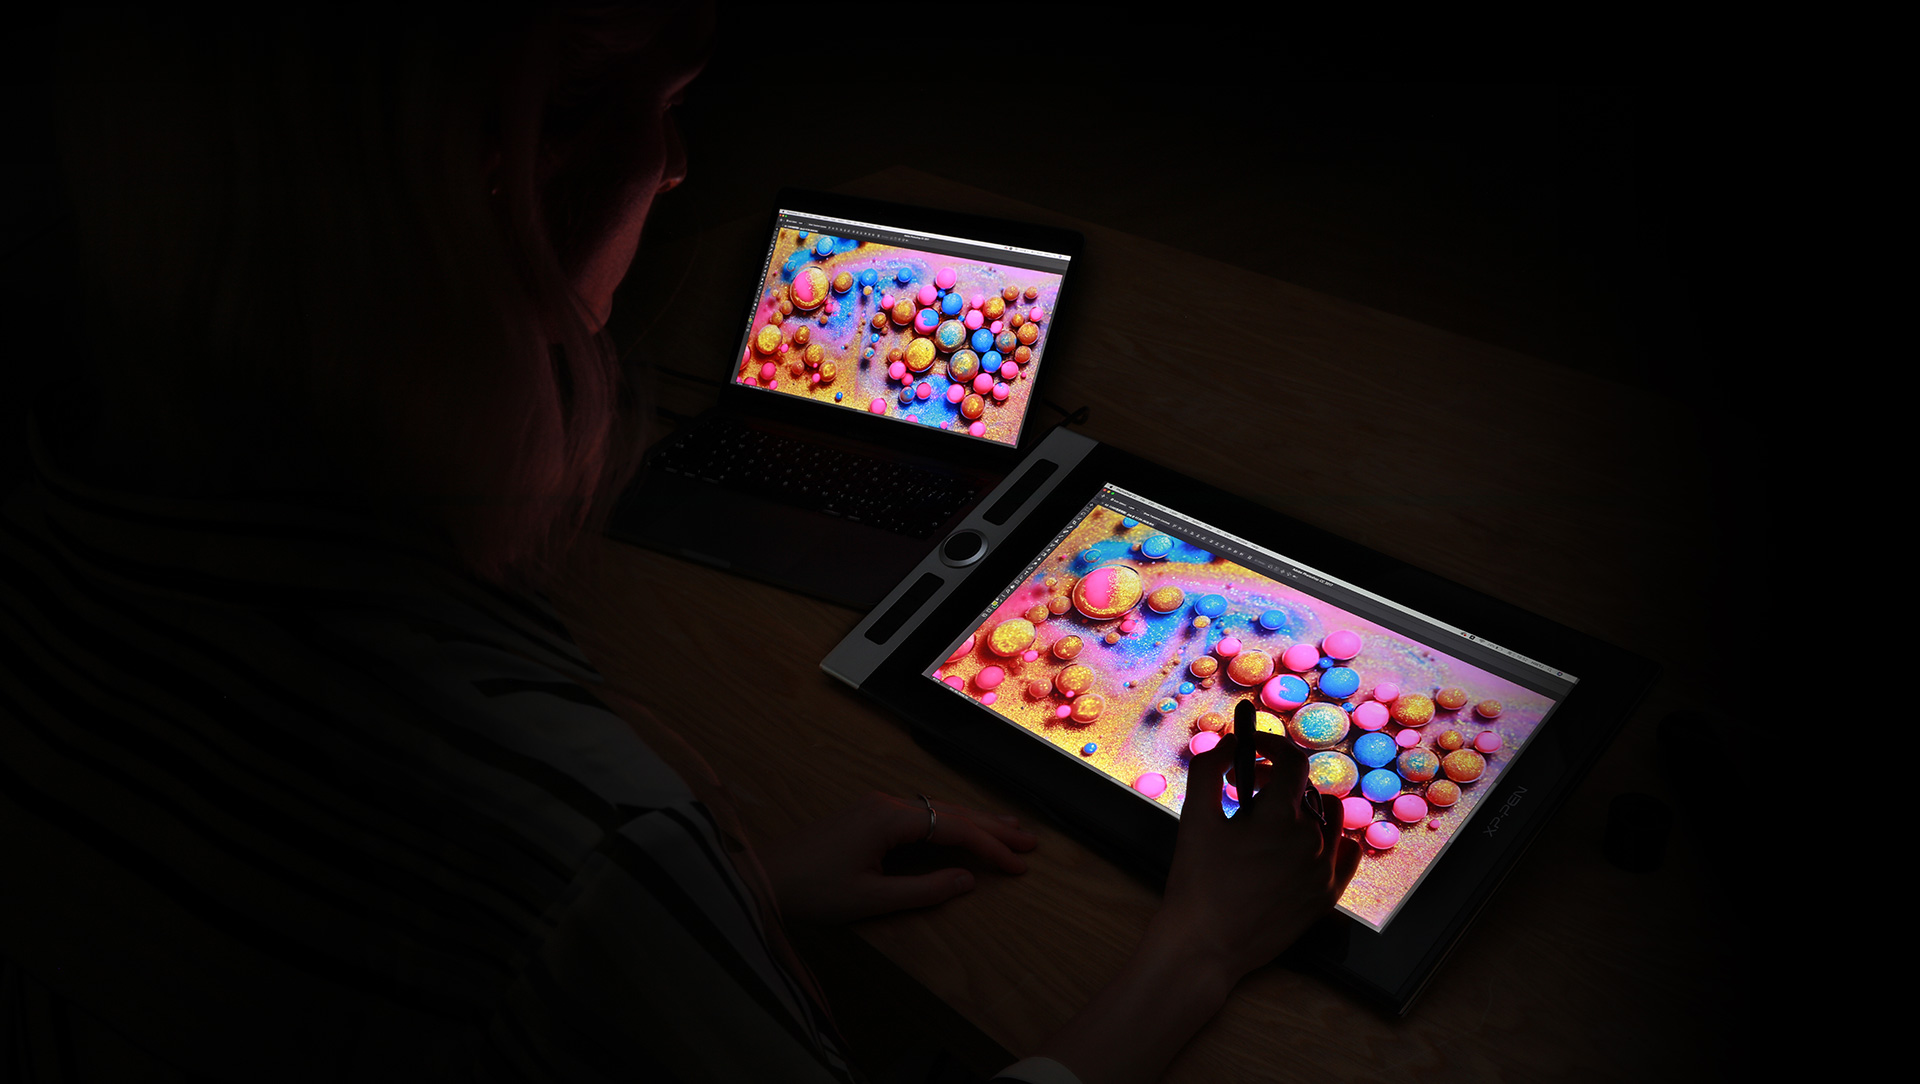 XP-Pen Innovator 16 digital art tablet With a screen color gamut of 92% Adobe® RGB